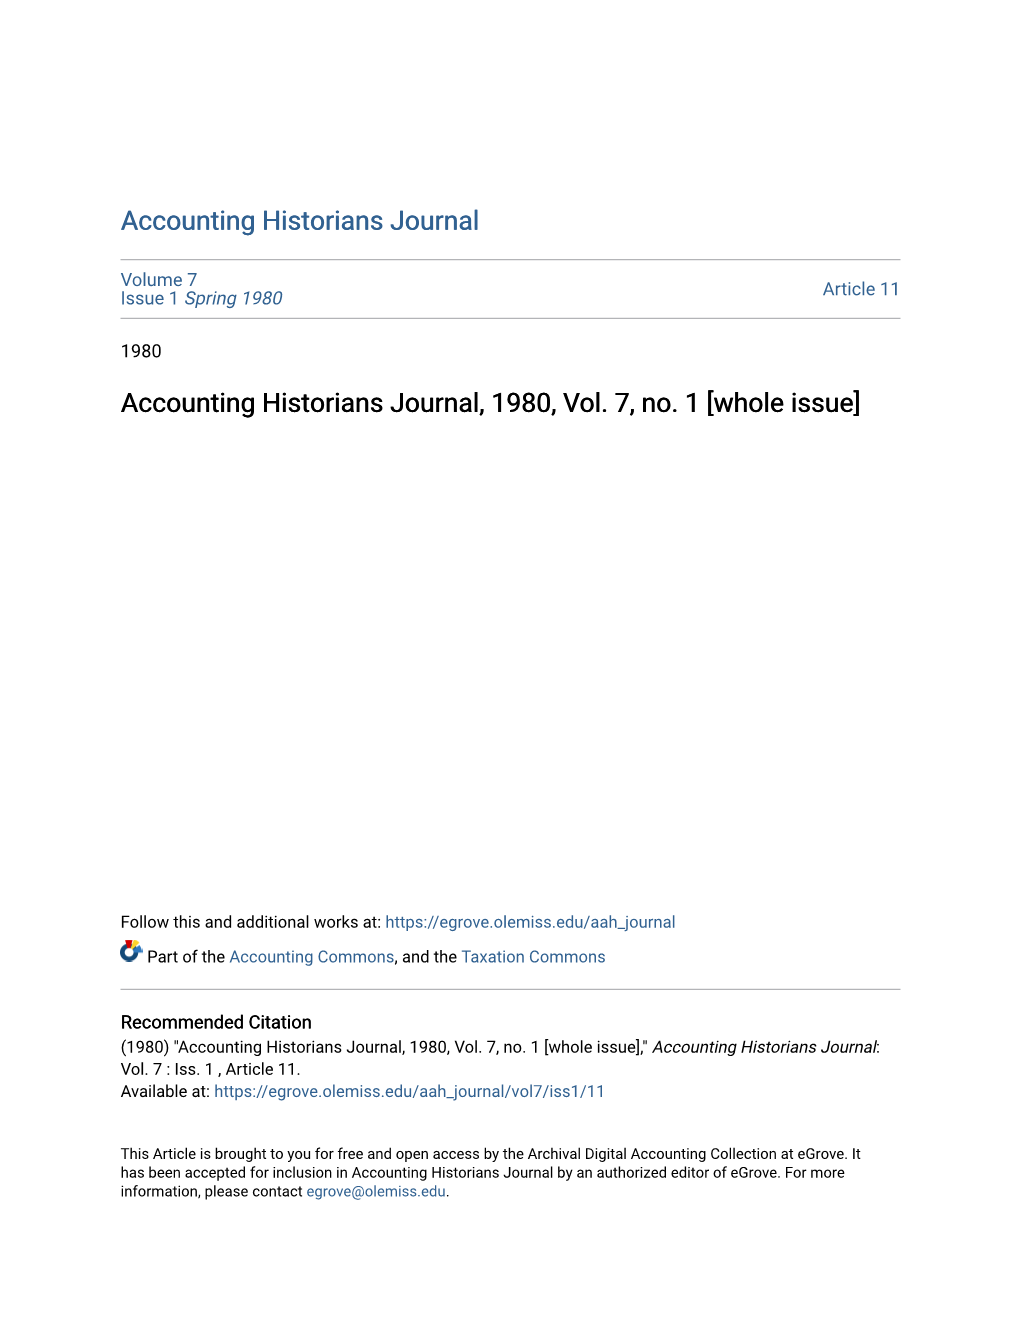 Accounting Historians Journal, 1980, Vol. 7, No. 1 [Whole Issue]